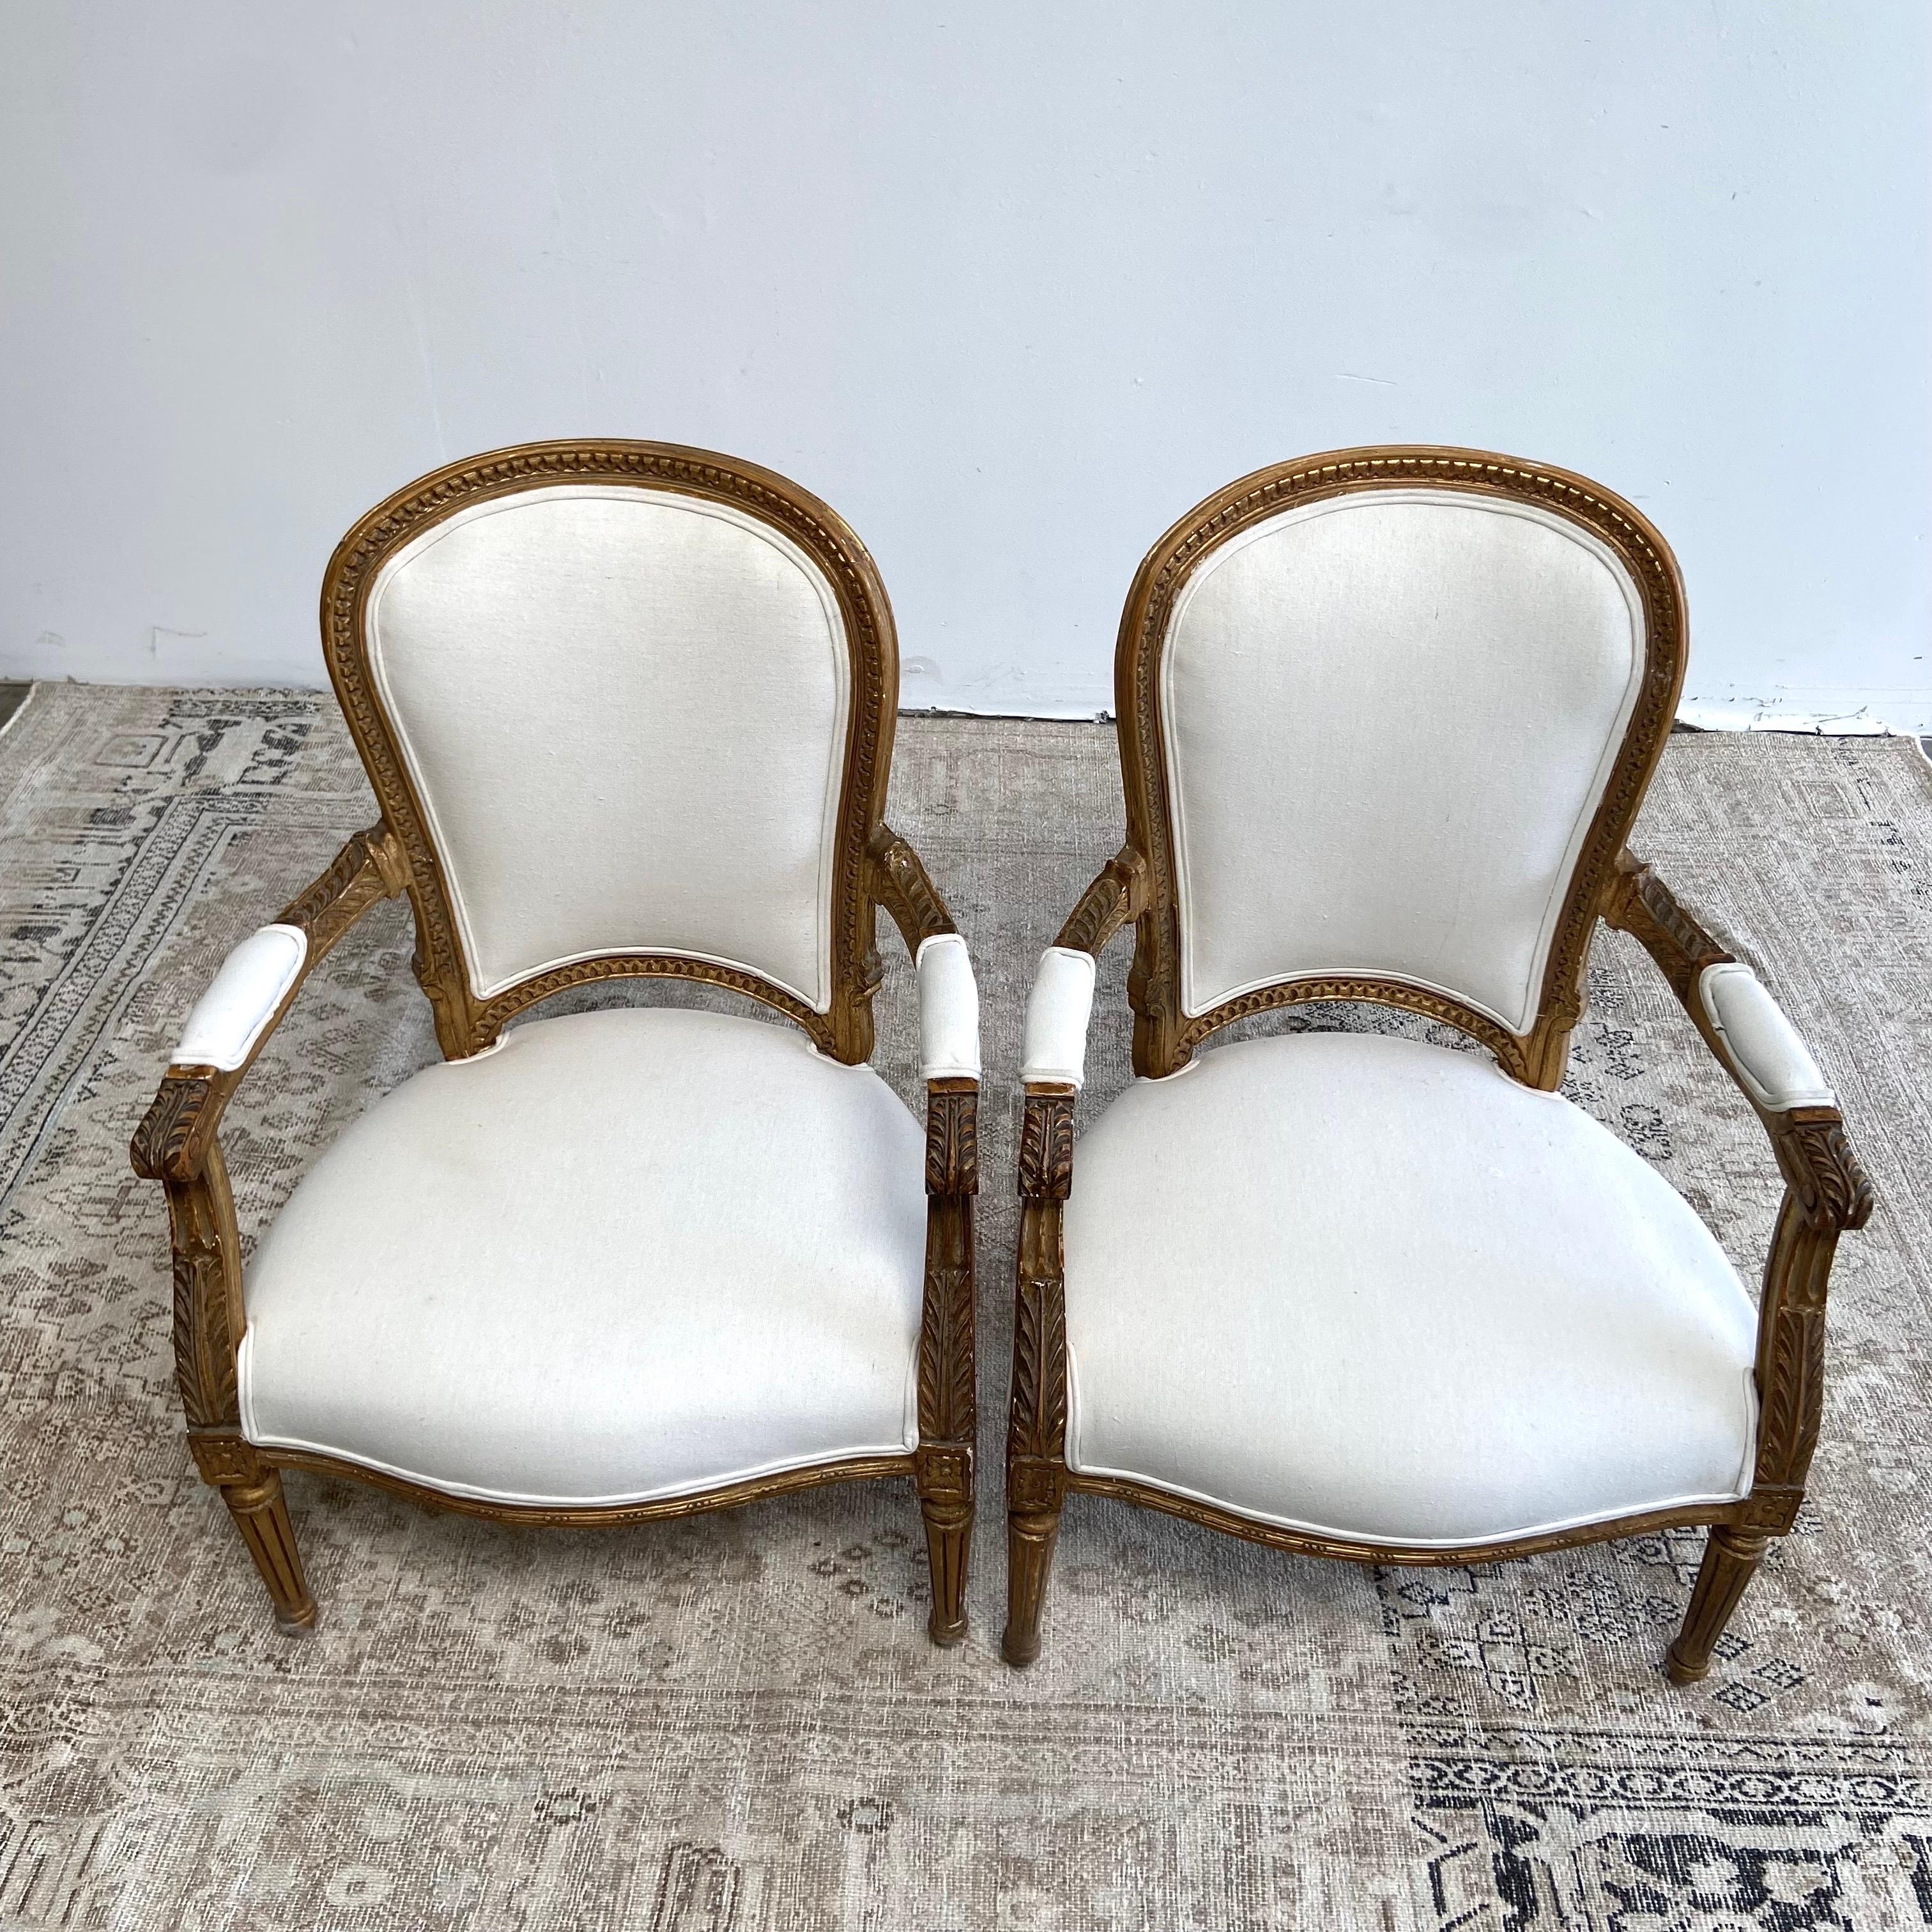 Vintage French Style Louis XVI Open Arm Chairs with Linen Upholstery For Sale 4